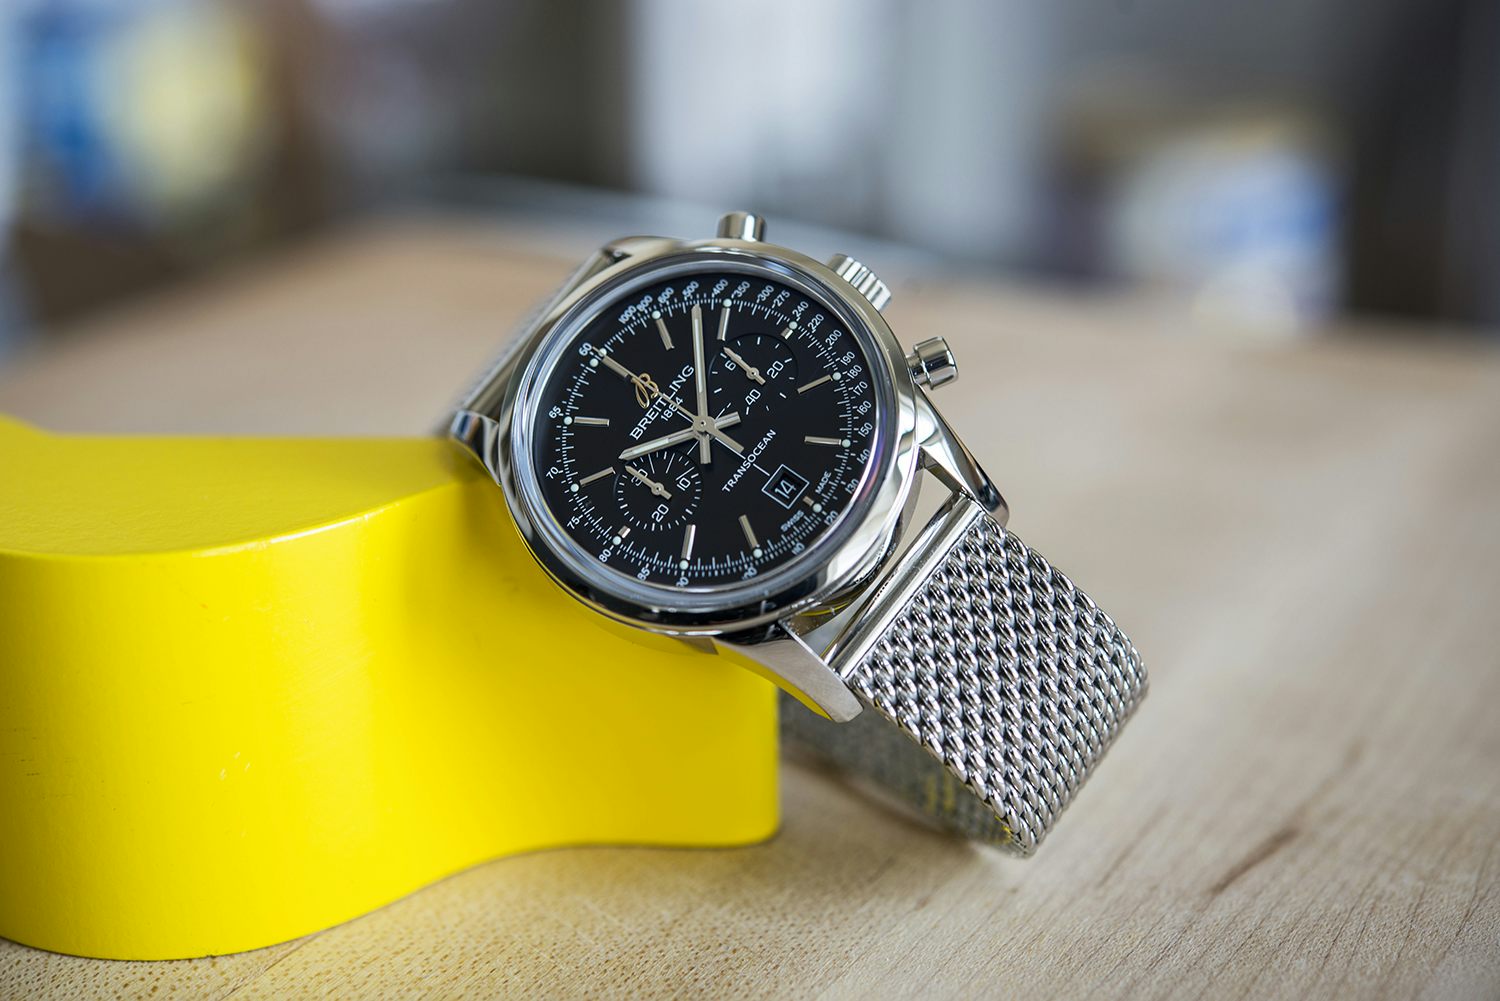 A Week On The Wrist: The Breitling Transocean Chronograph 38 - Hodinkee